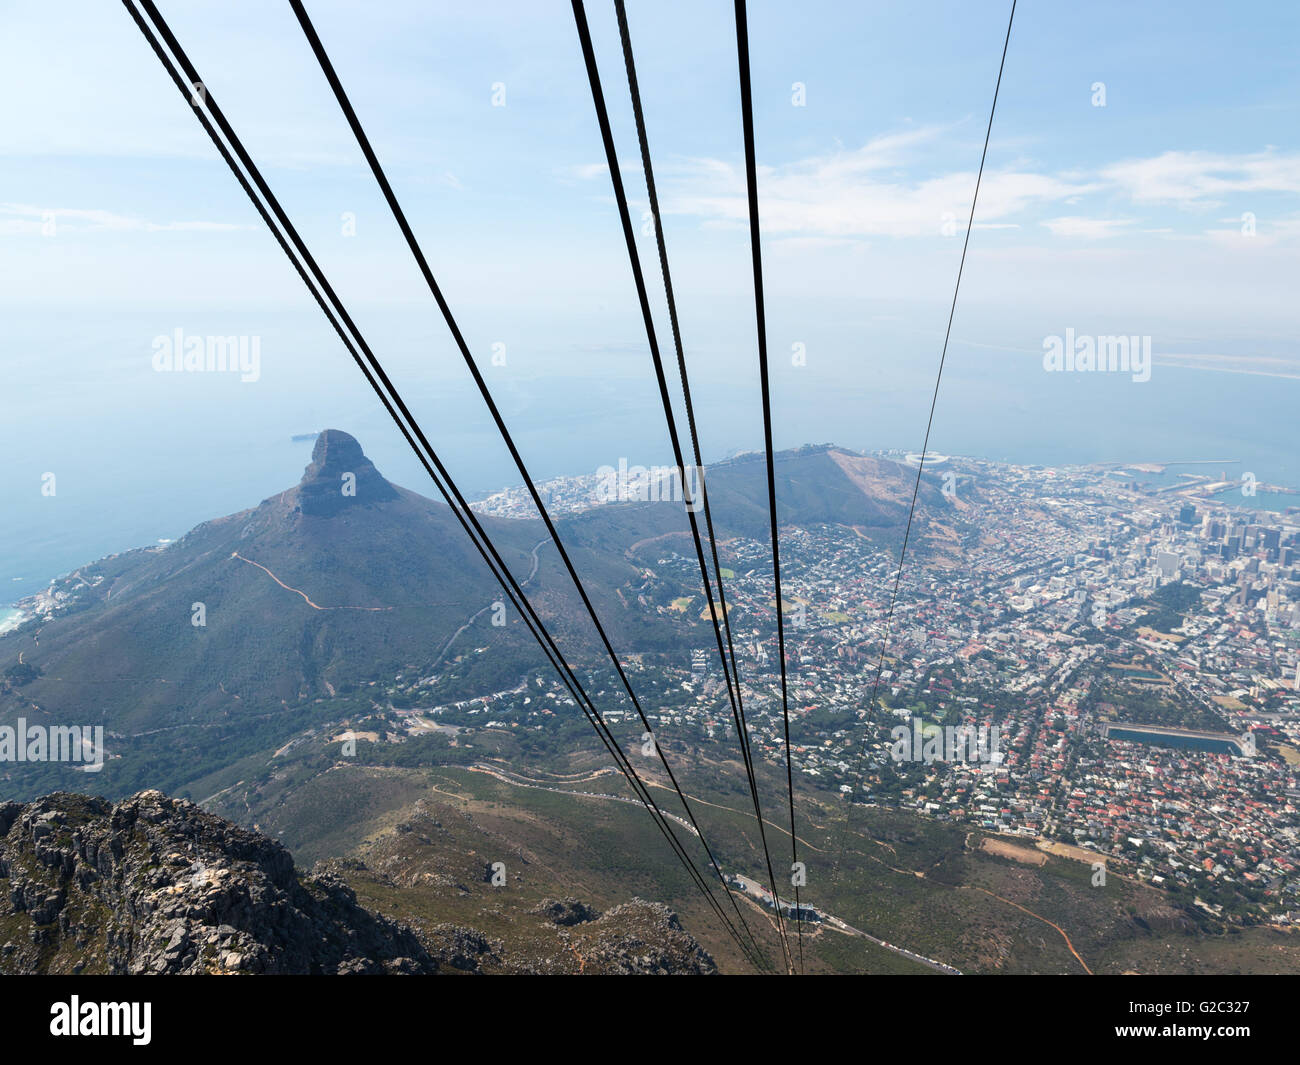 View Down The Cable Car Route From The Summit Of Table Mountain Stock Photo